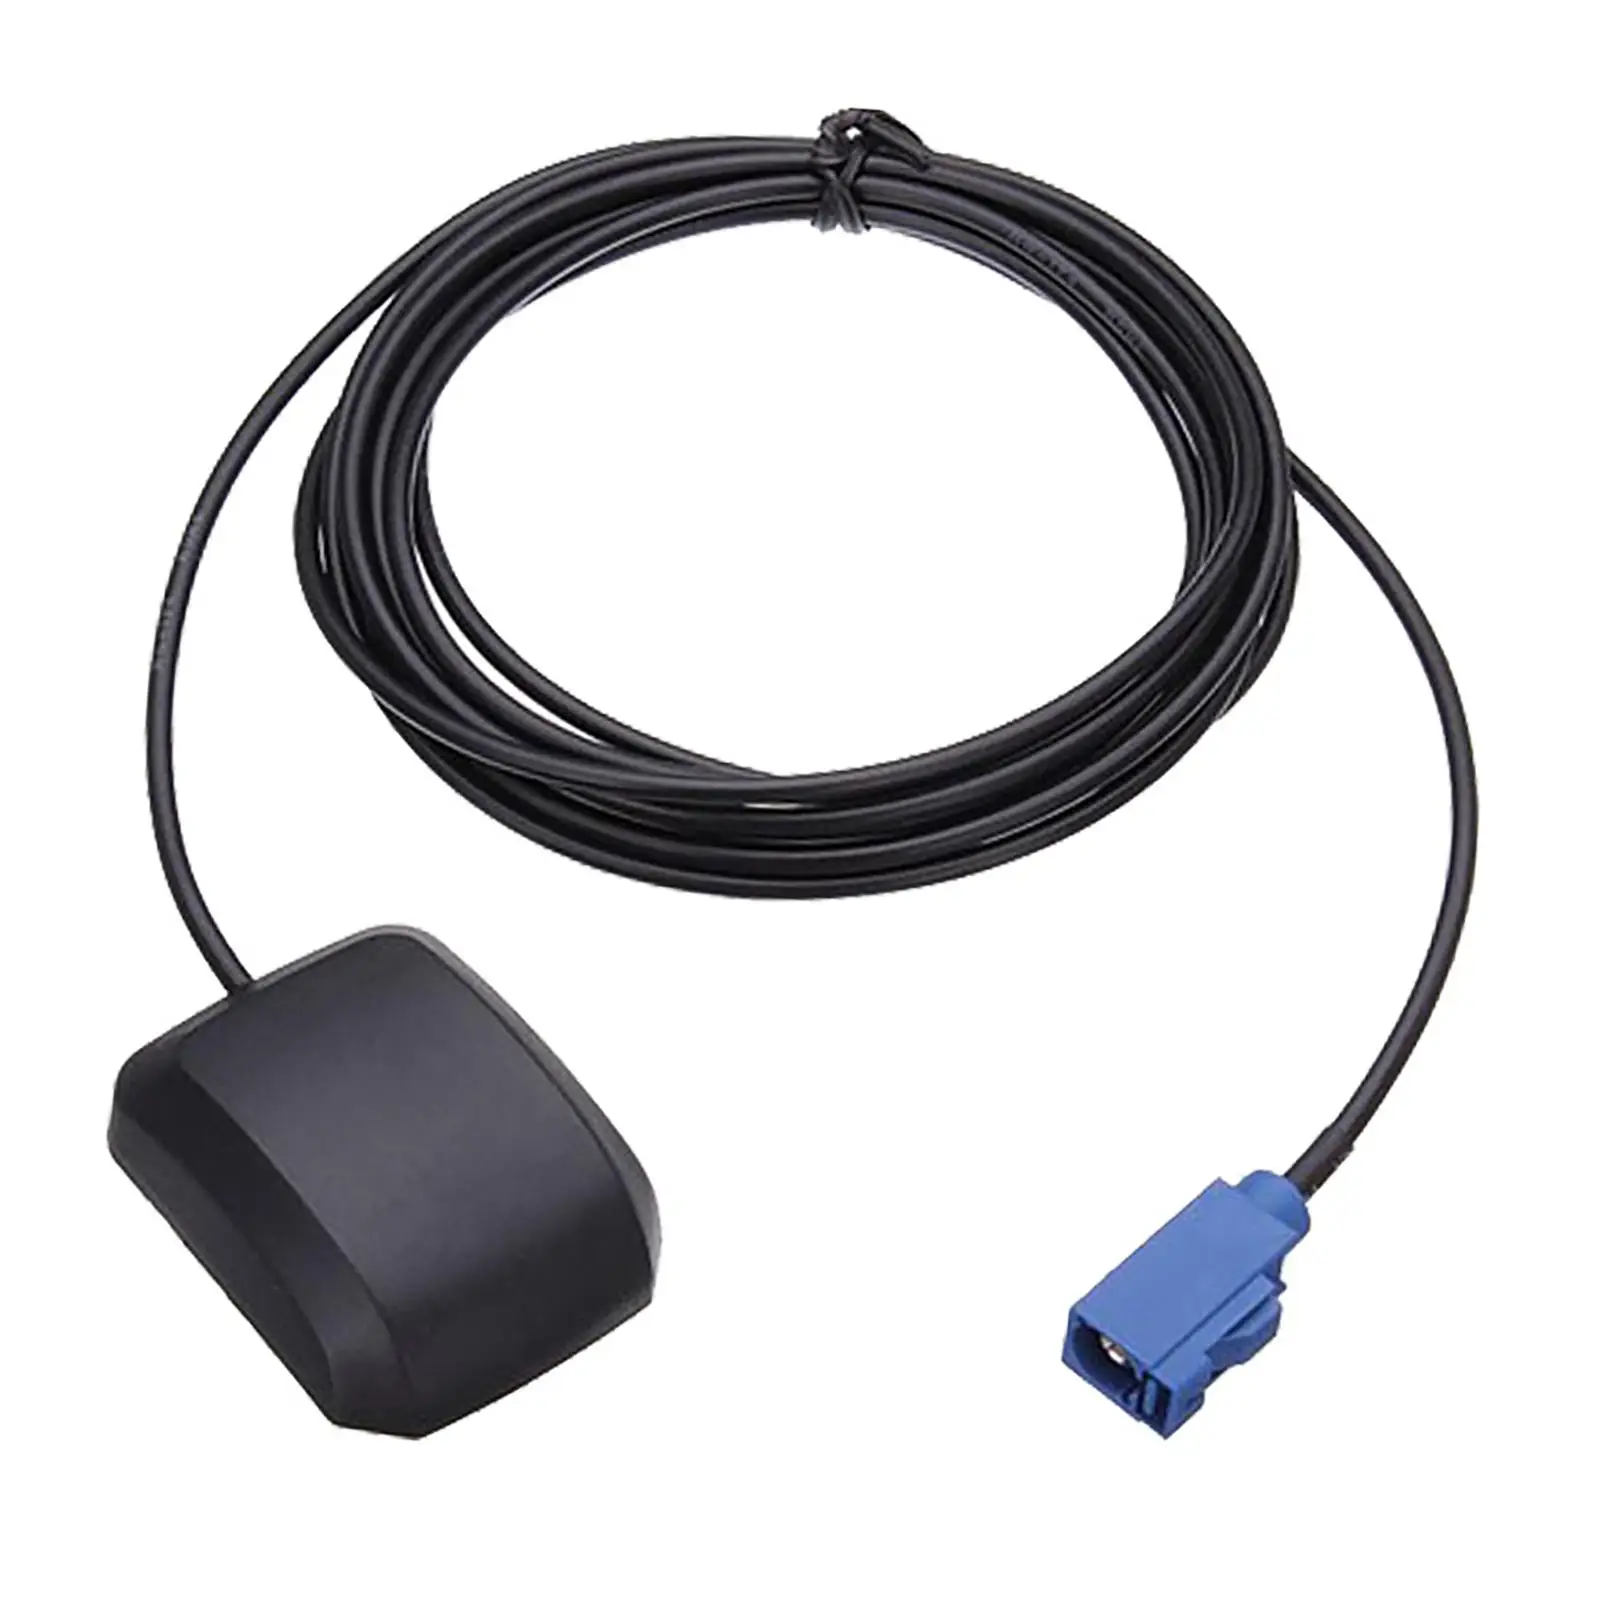 Vehicle Active Navigation with Male Connector Locator for Car Stereo Marine Parts